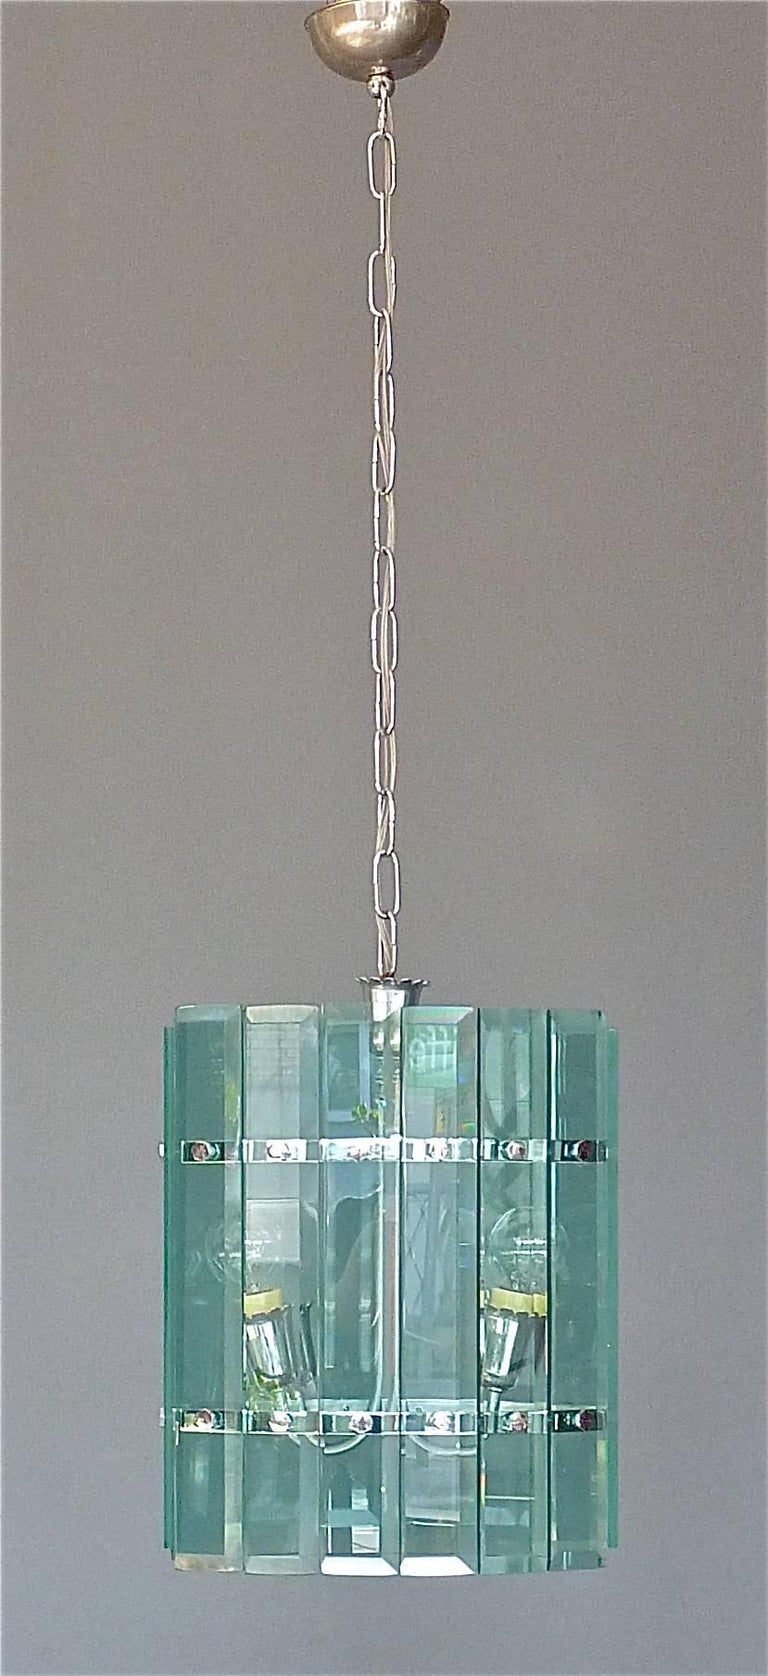 Mid-Century Modern Green Faceted Glass Chrome Metal Chandelier Pietro Chiesa for Fontana Arte 1940s For Sale